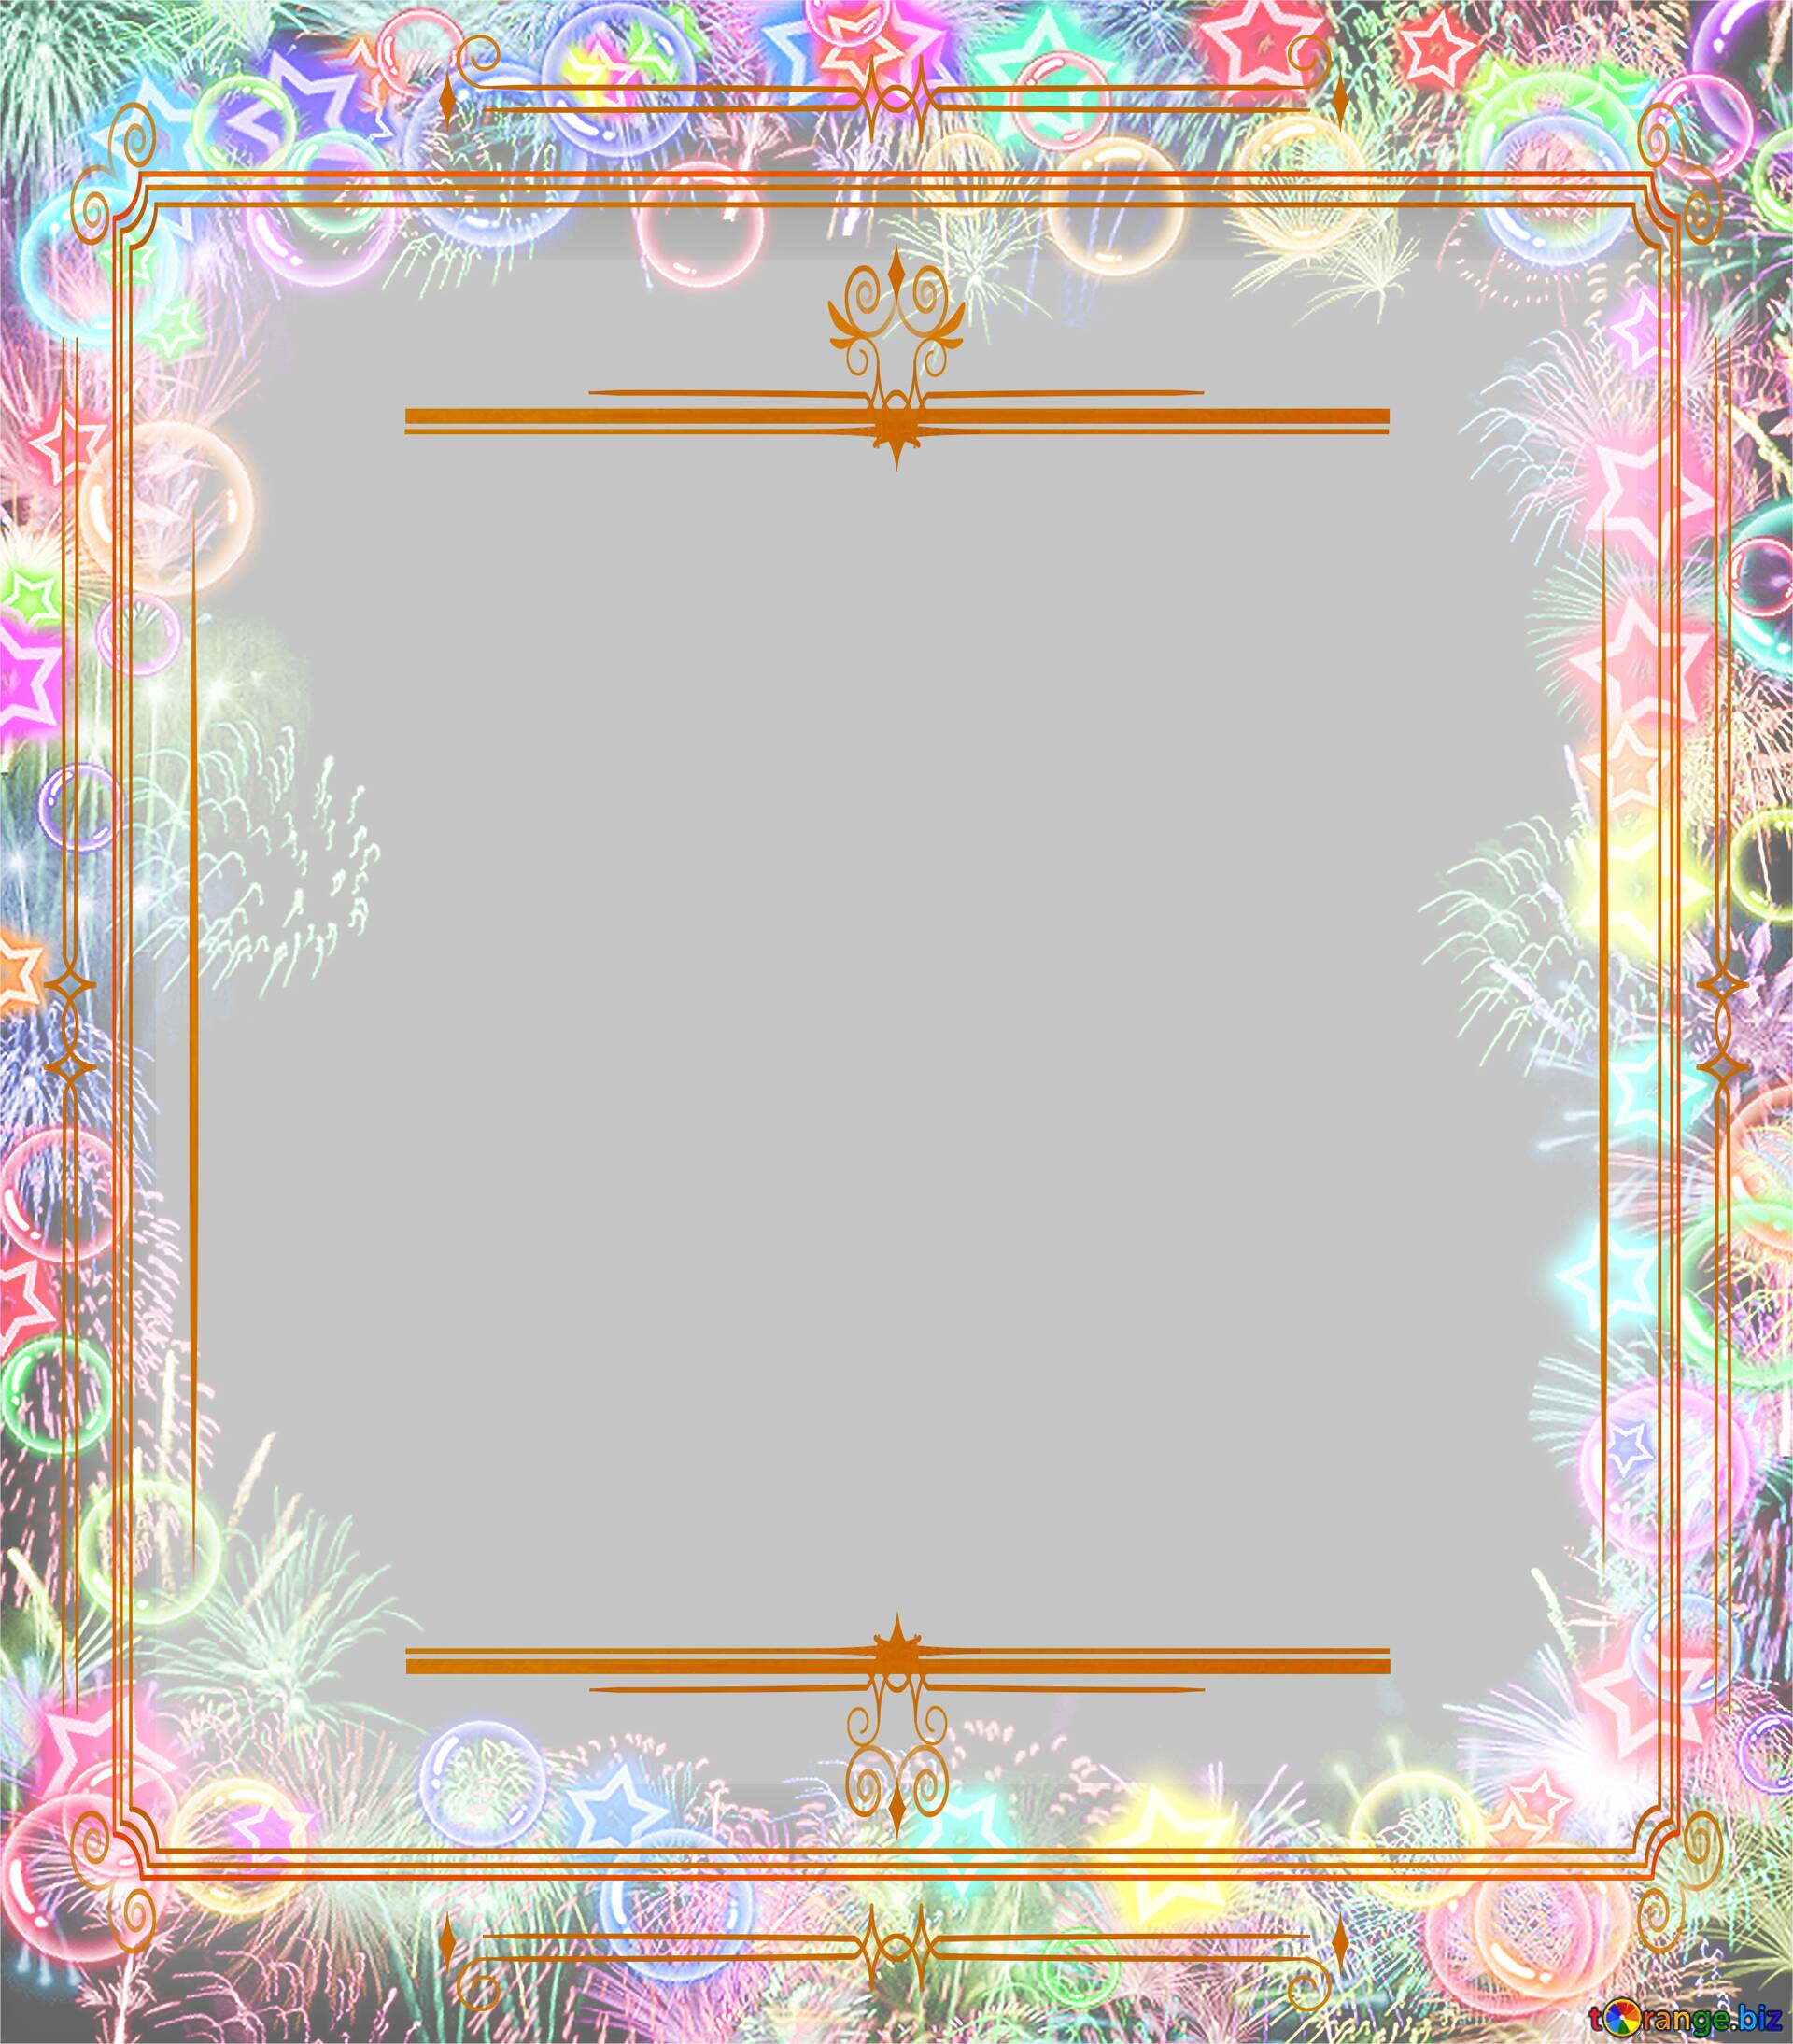 Download Free Picture Frame For Congratulations Vintage Frame Retro